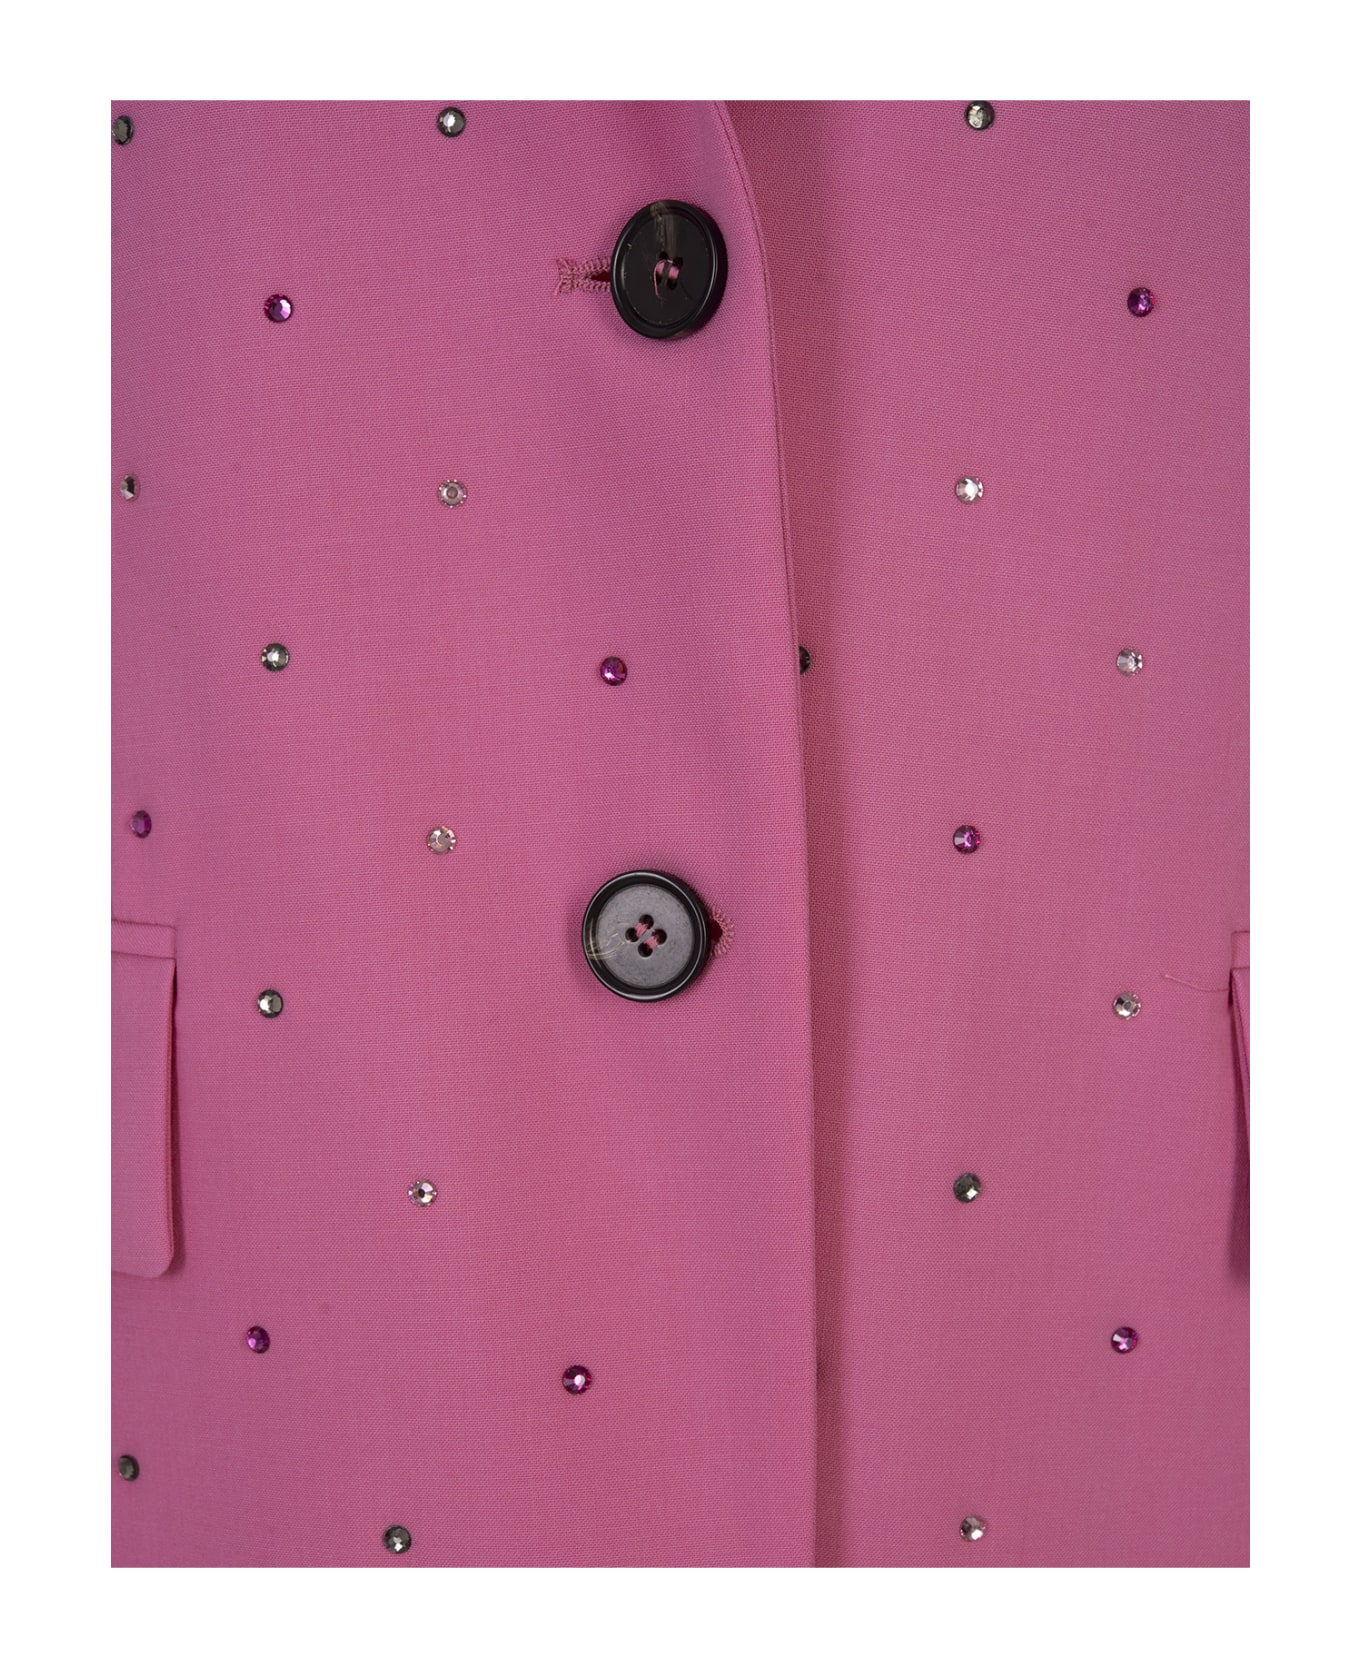 MSGM 'wool Suiting' Jacket In Pink Virgin Wool With Jewelled Applications - Pink